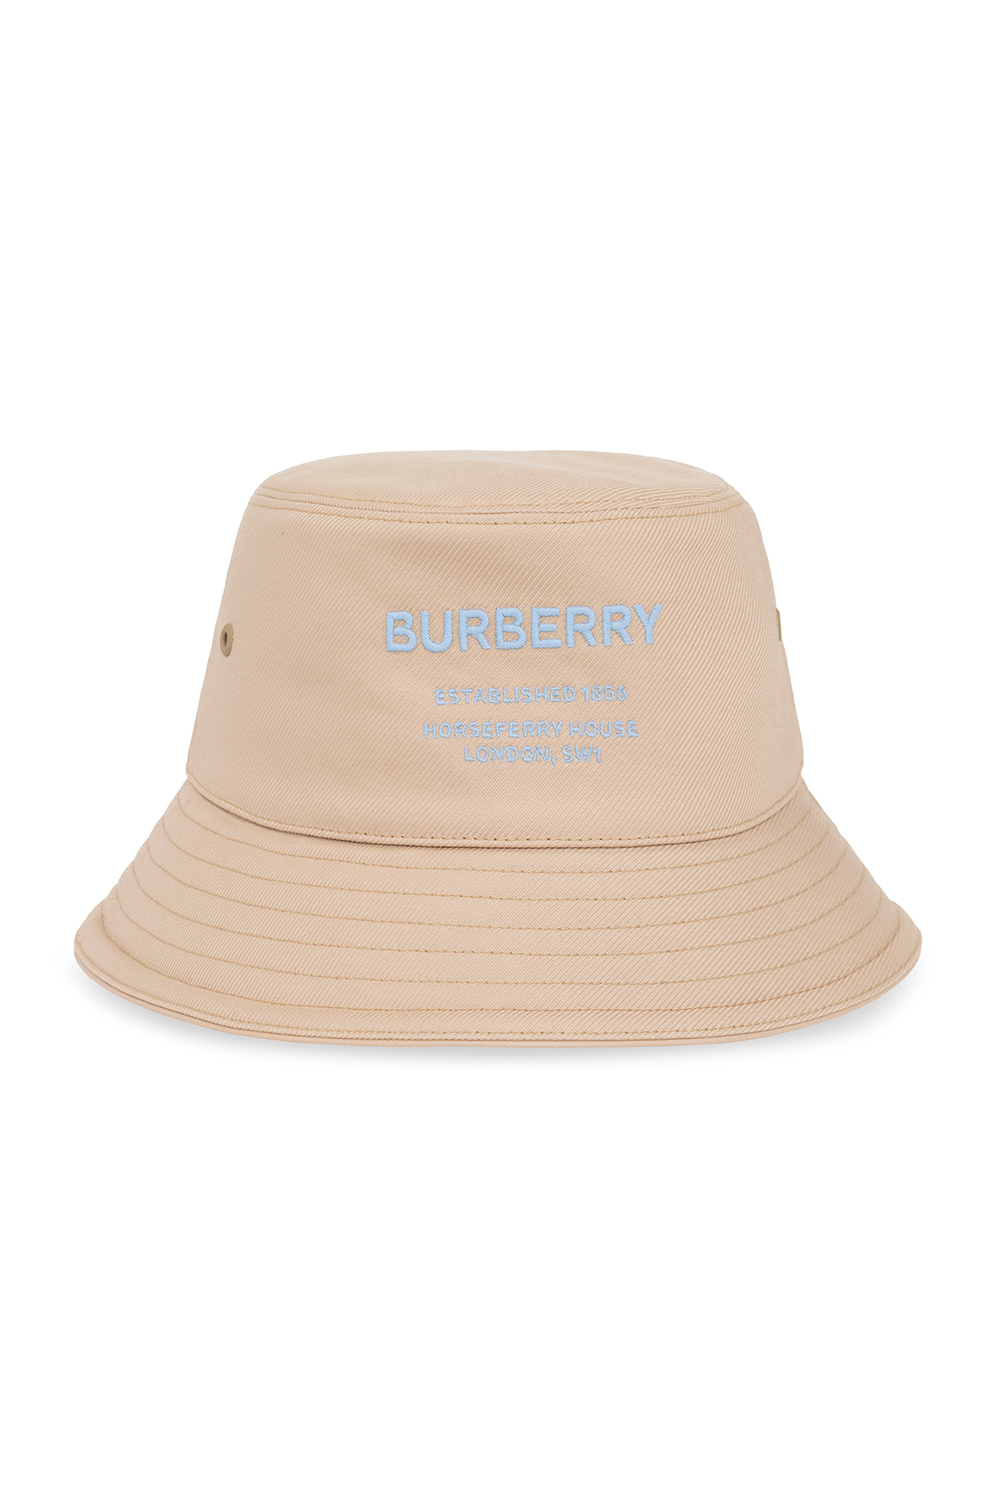 Burberry Upgrade your style game wearing the ® Safari Hat